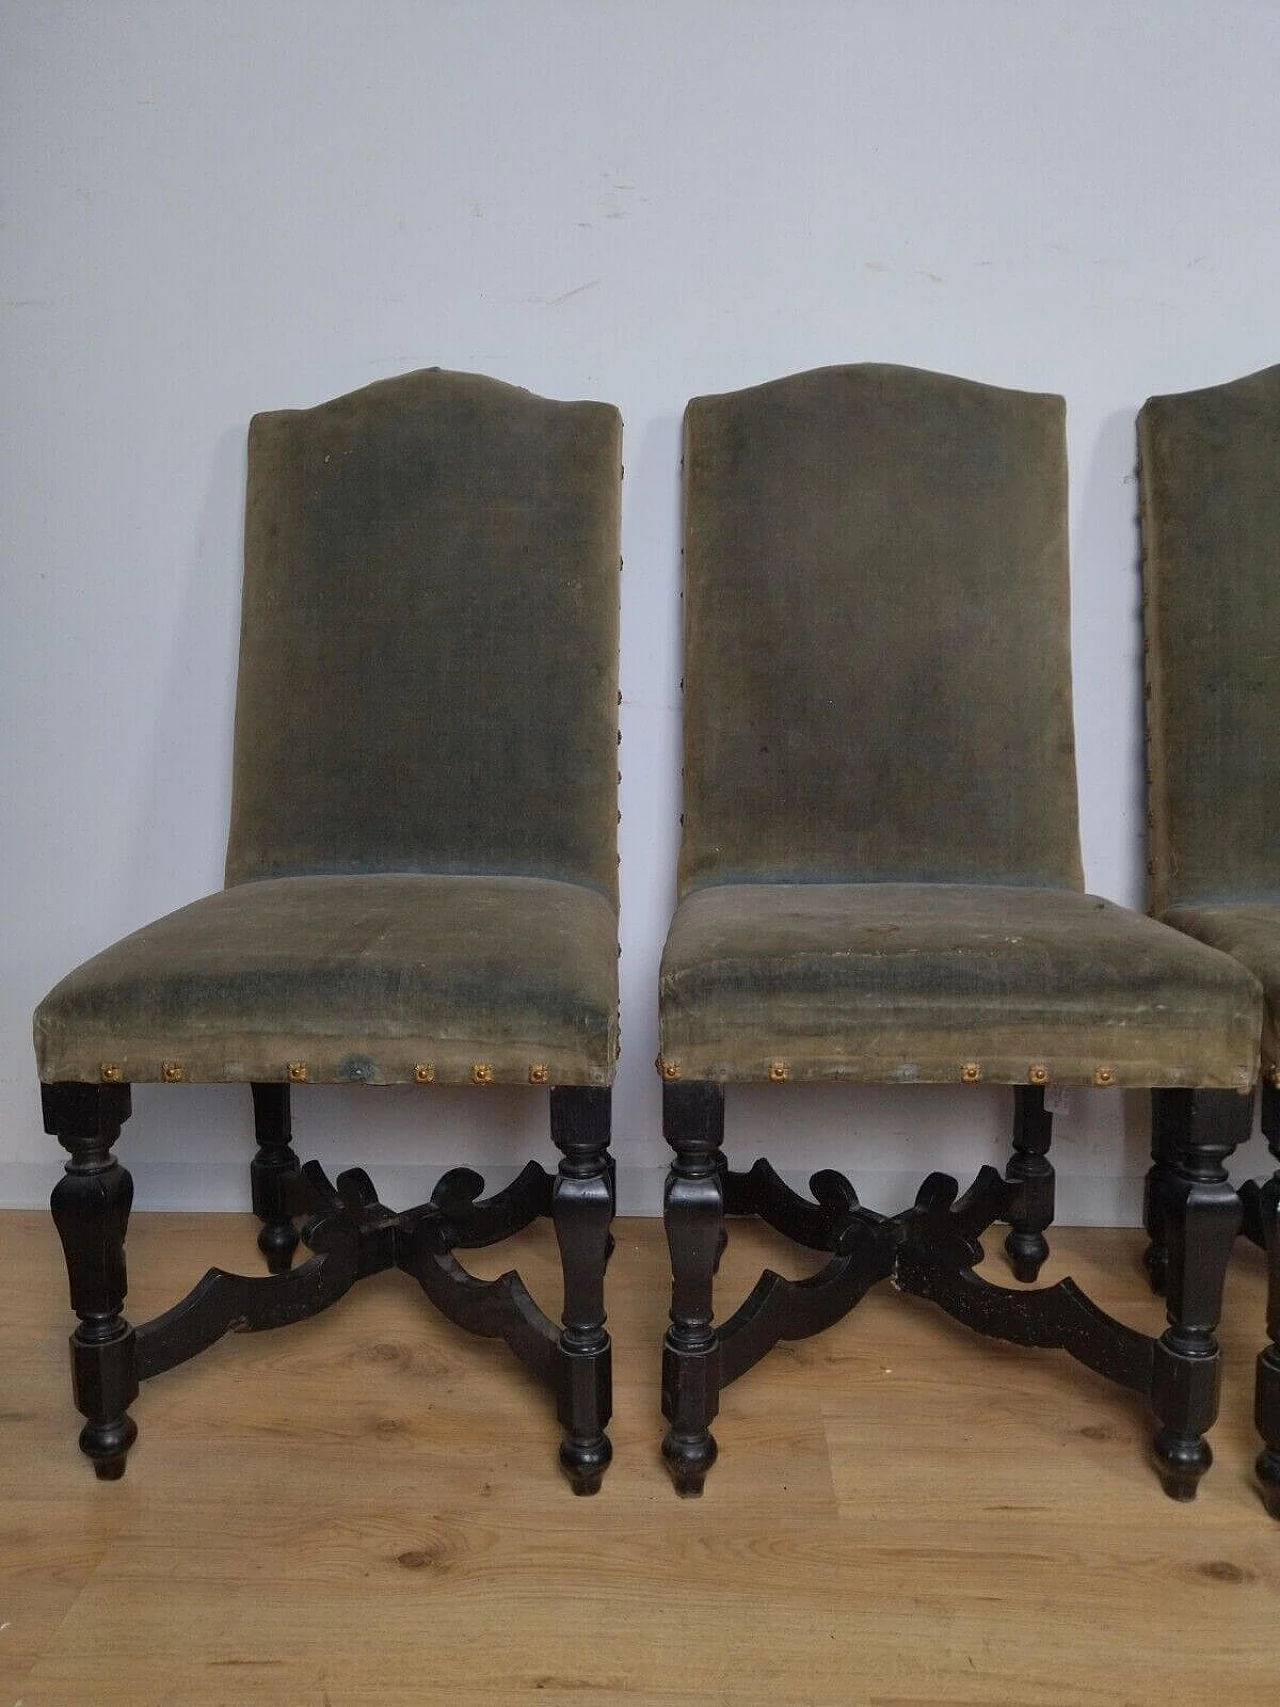 4 Rocchetto chairs in ebonised wood, 18th century 4